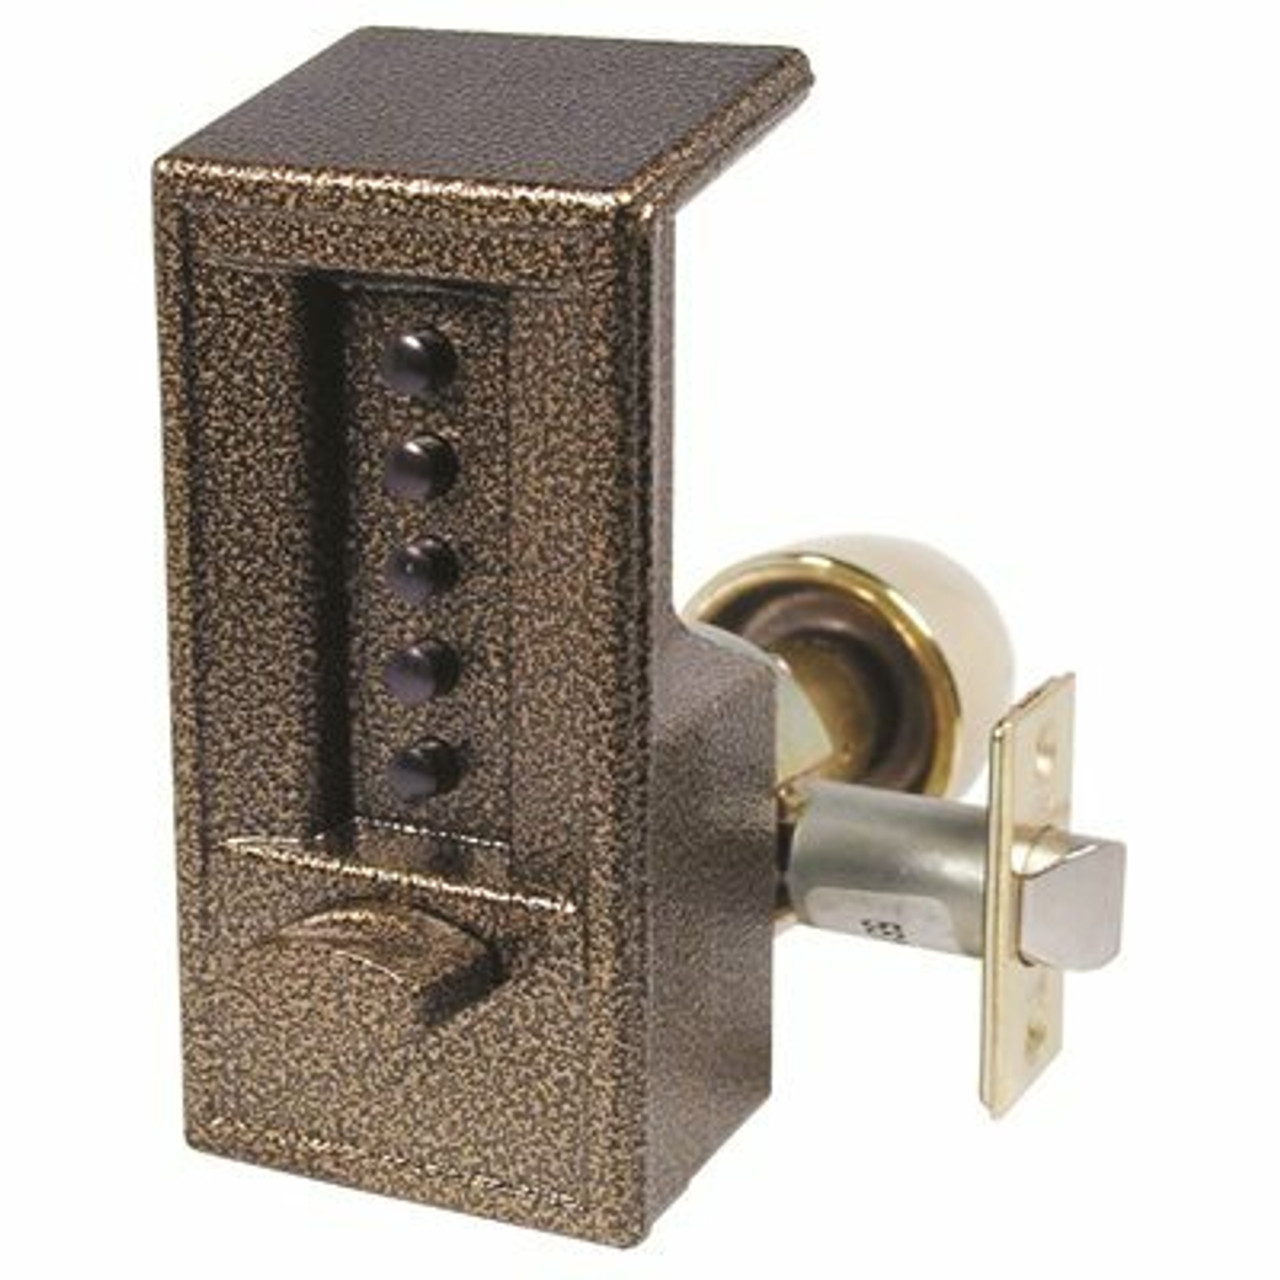 Kaba Ilco Kaba Access Primary Res Pushbutton Entry Lock 2 3/4 Bs Goldtone